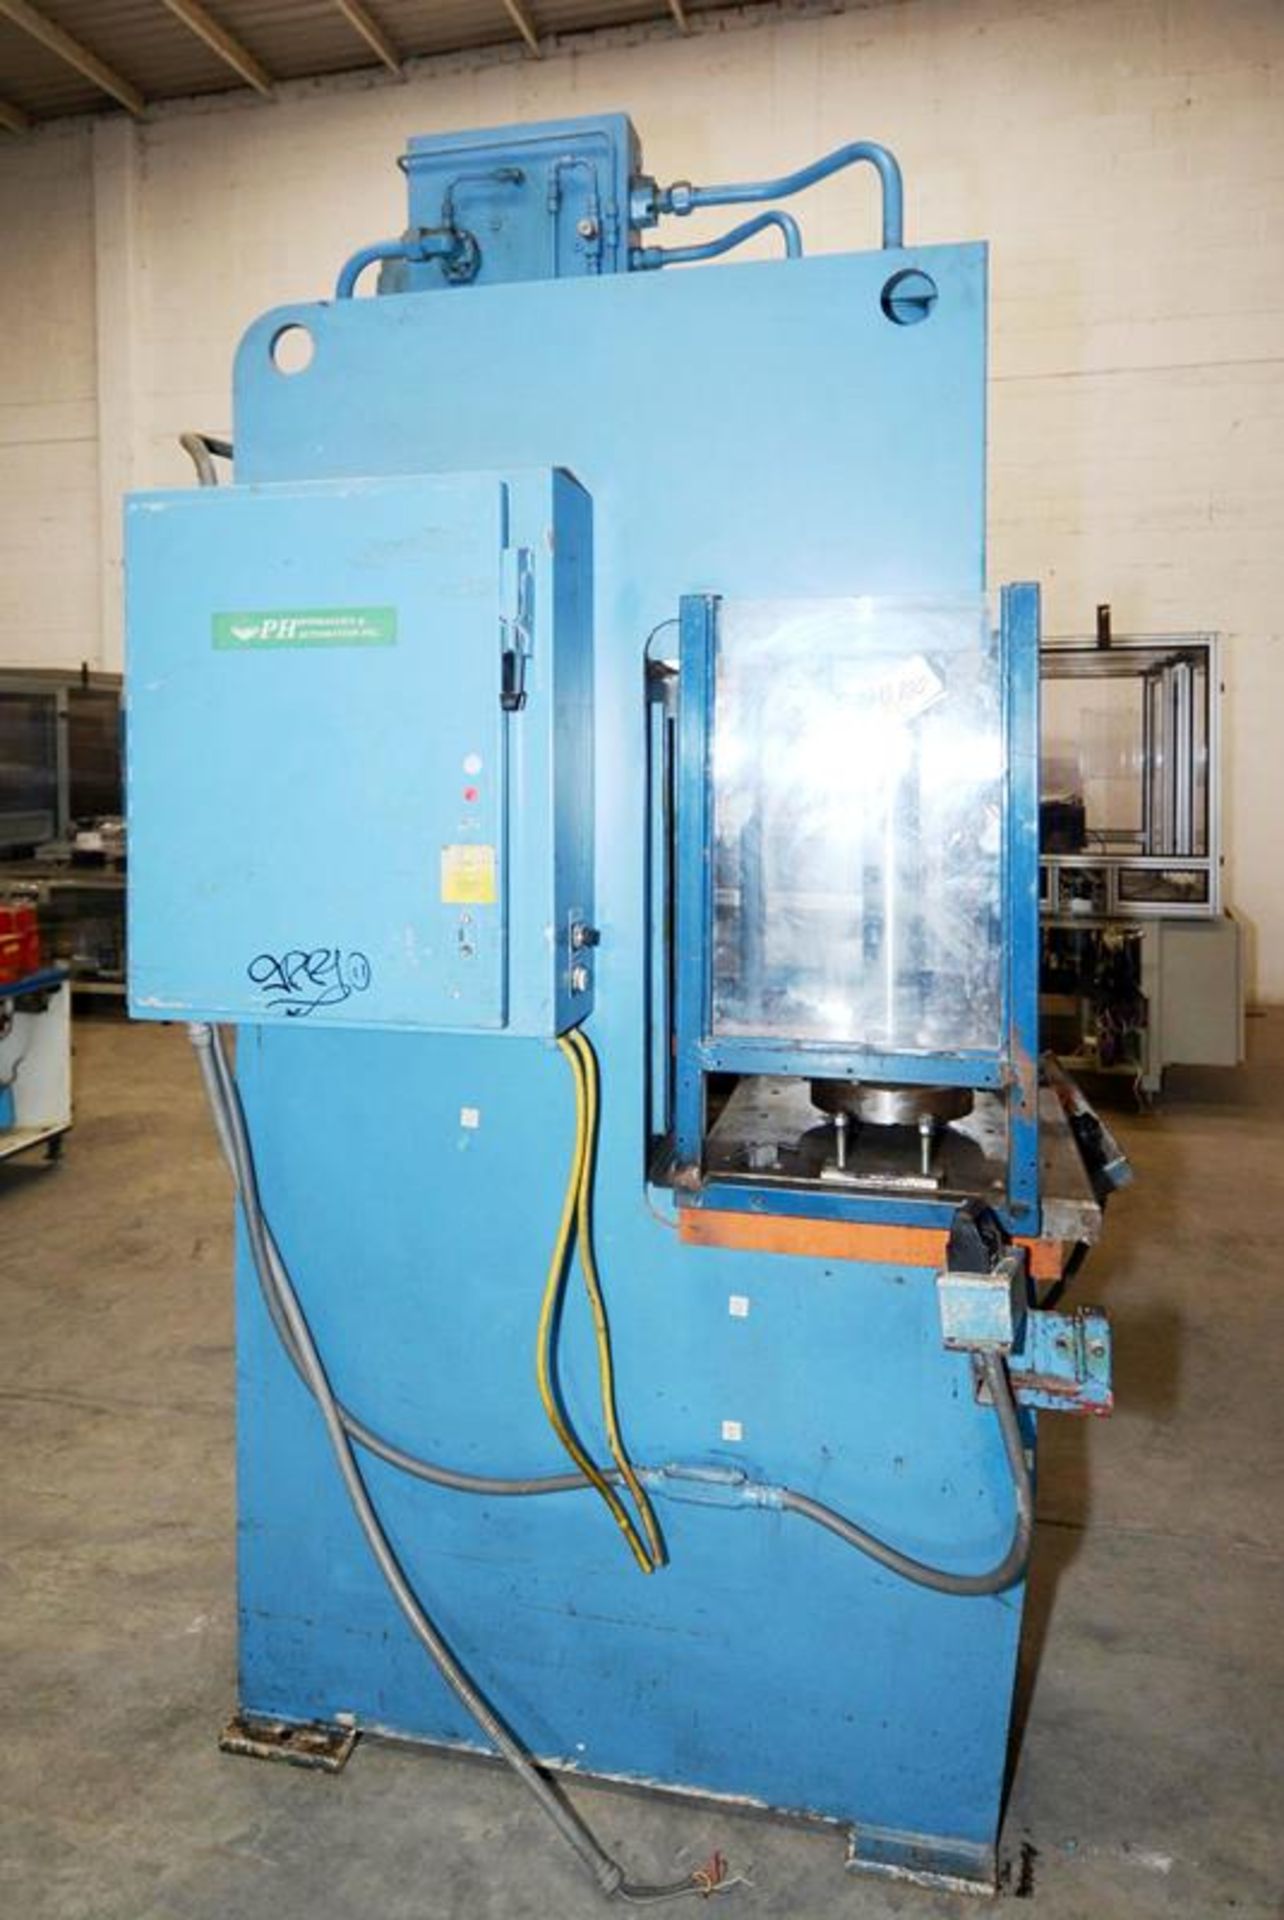 Equipment: Press. Brand: PH Hidraulics & Automation. Model: OGM-20. Year: N/A. Serial Number: 60668. - Image 11 of 14